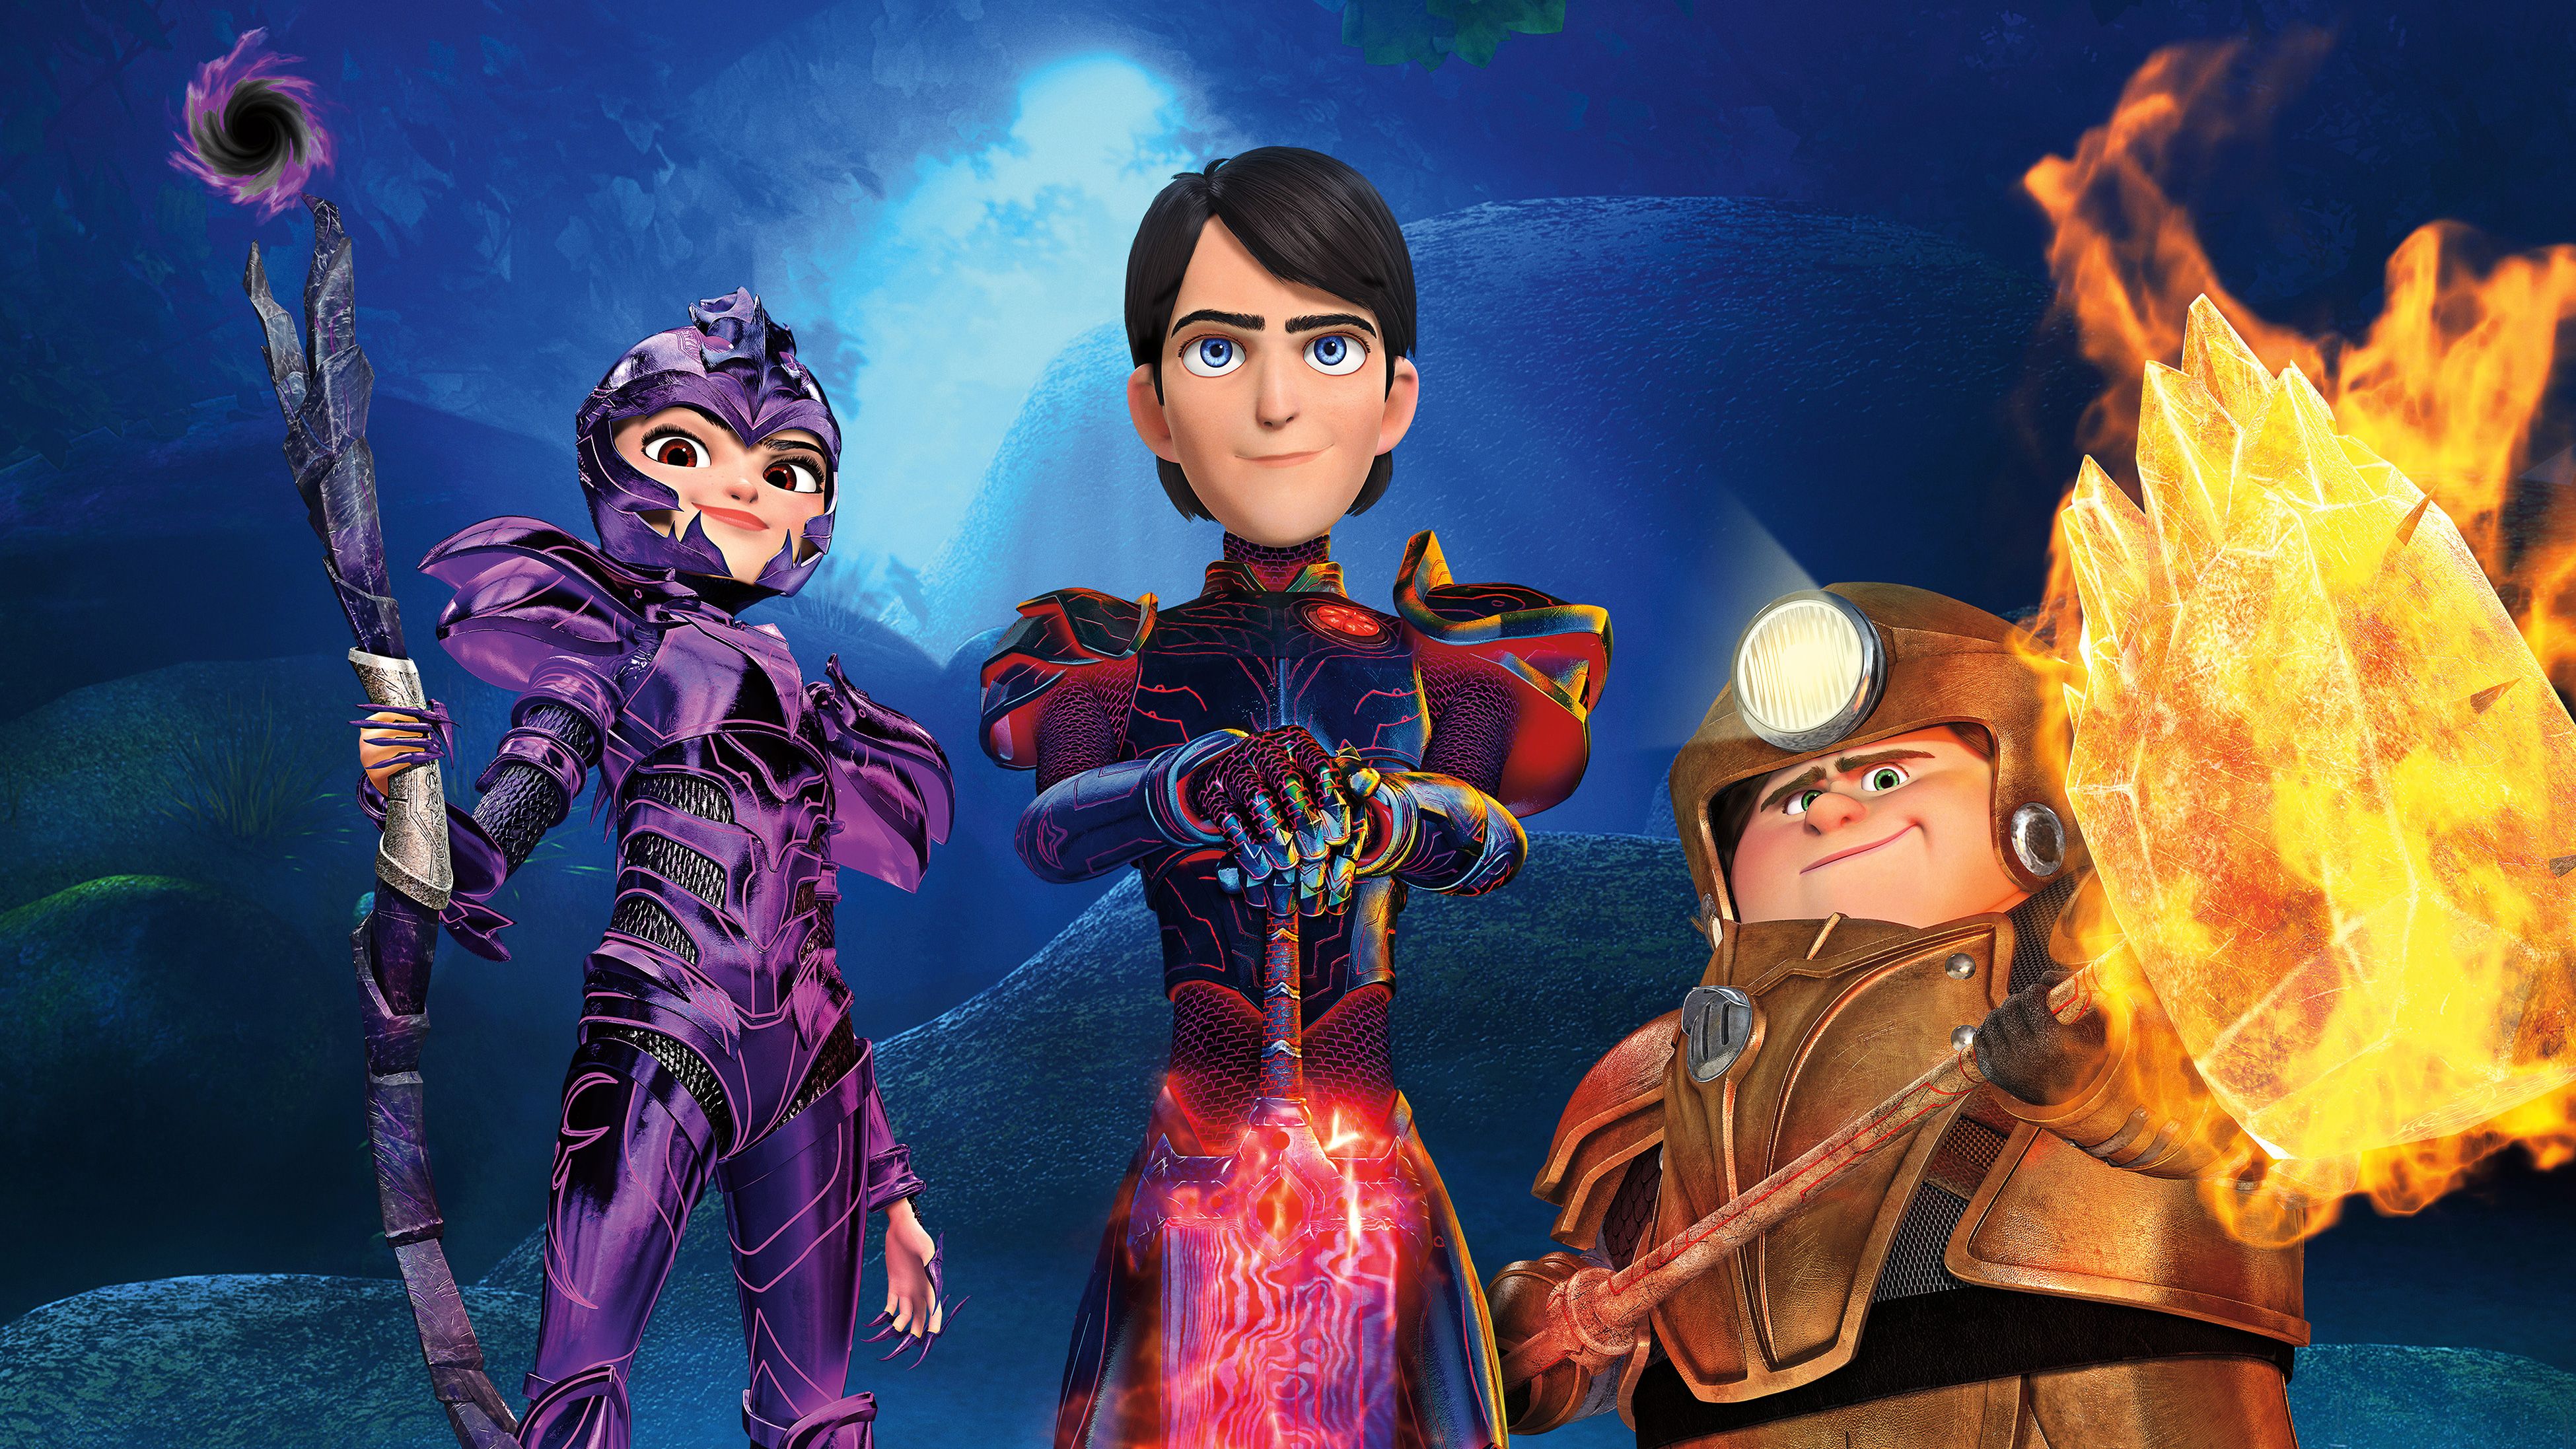 Trollhunters Tales Of Arcadia, HD Tv Shows, 4k Wallpapers, Image